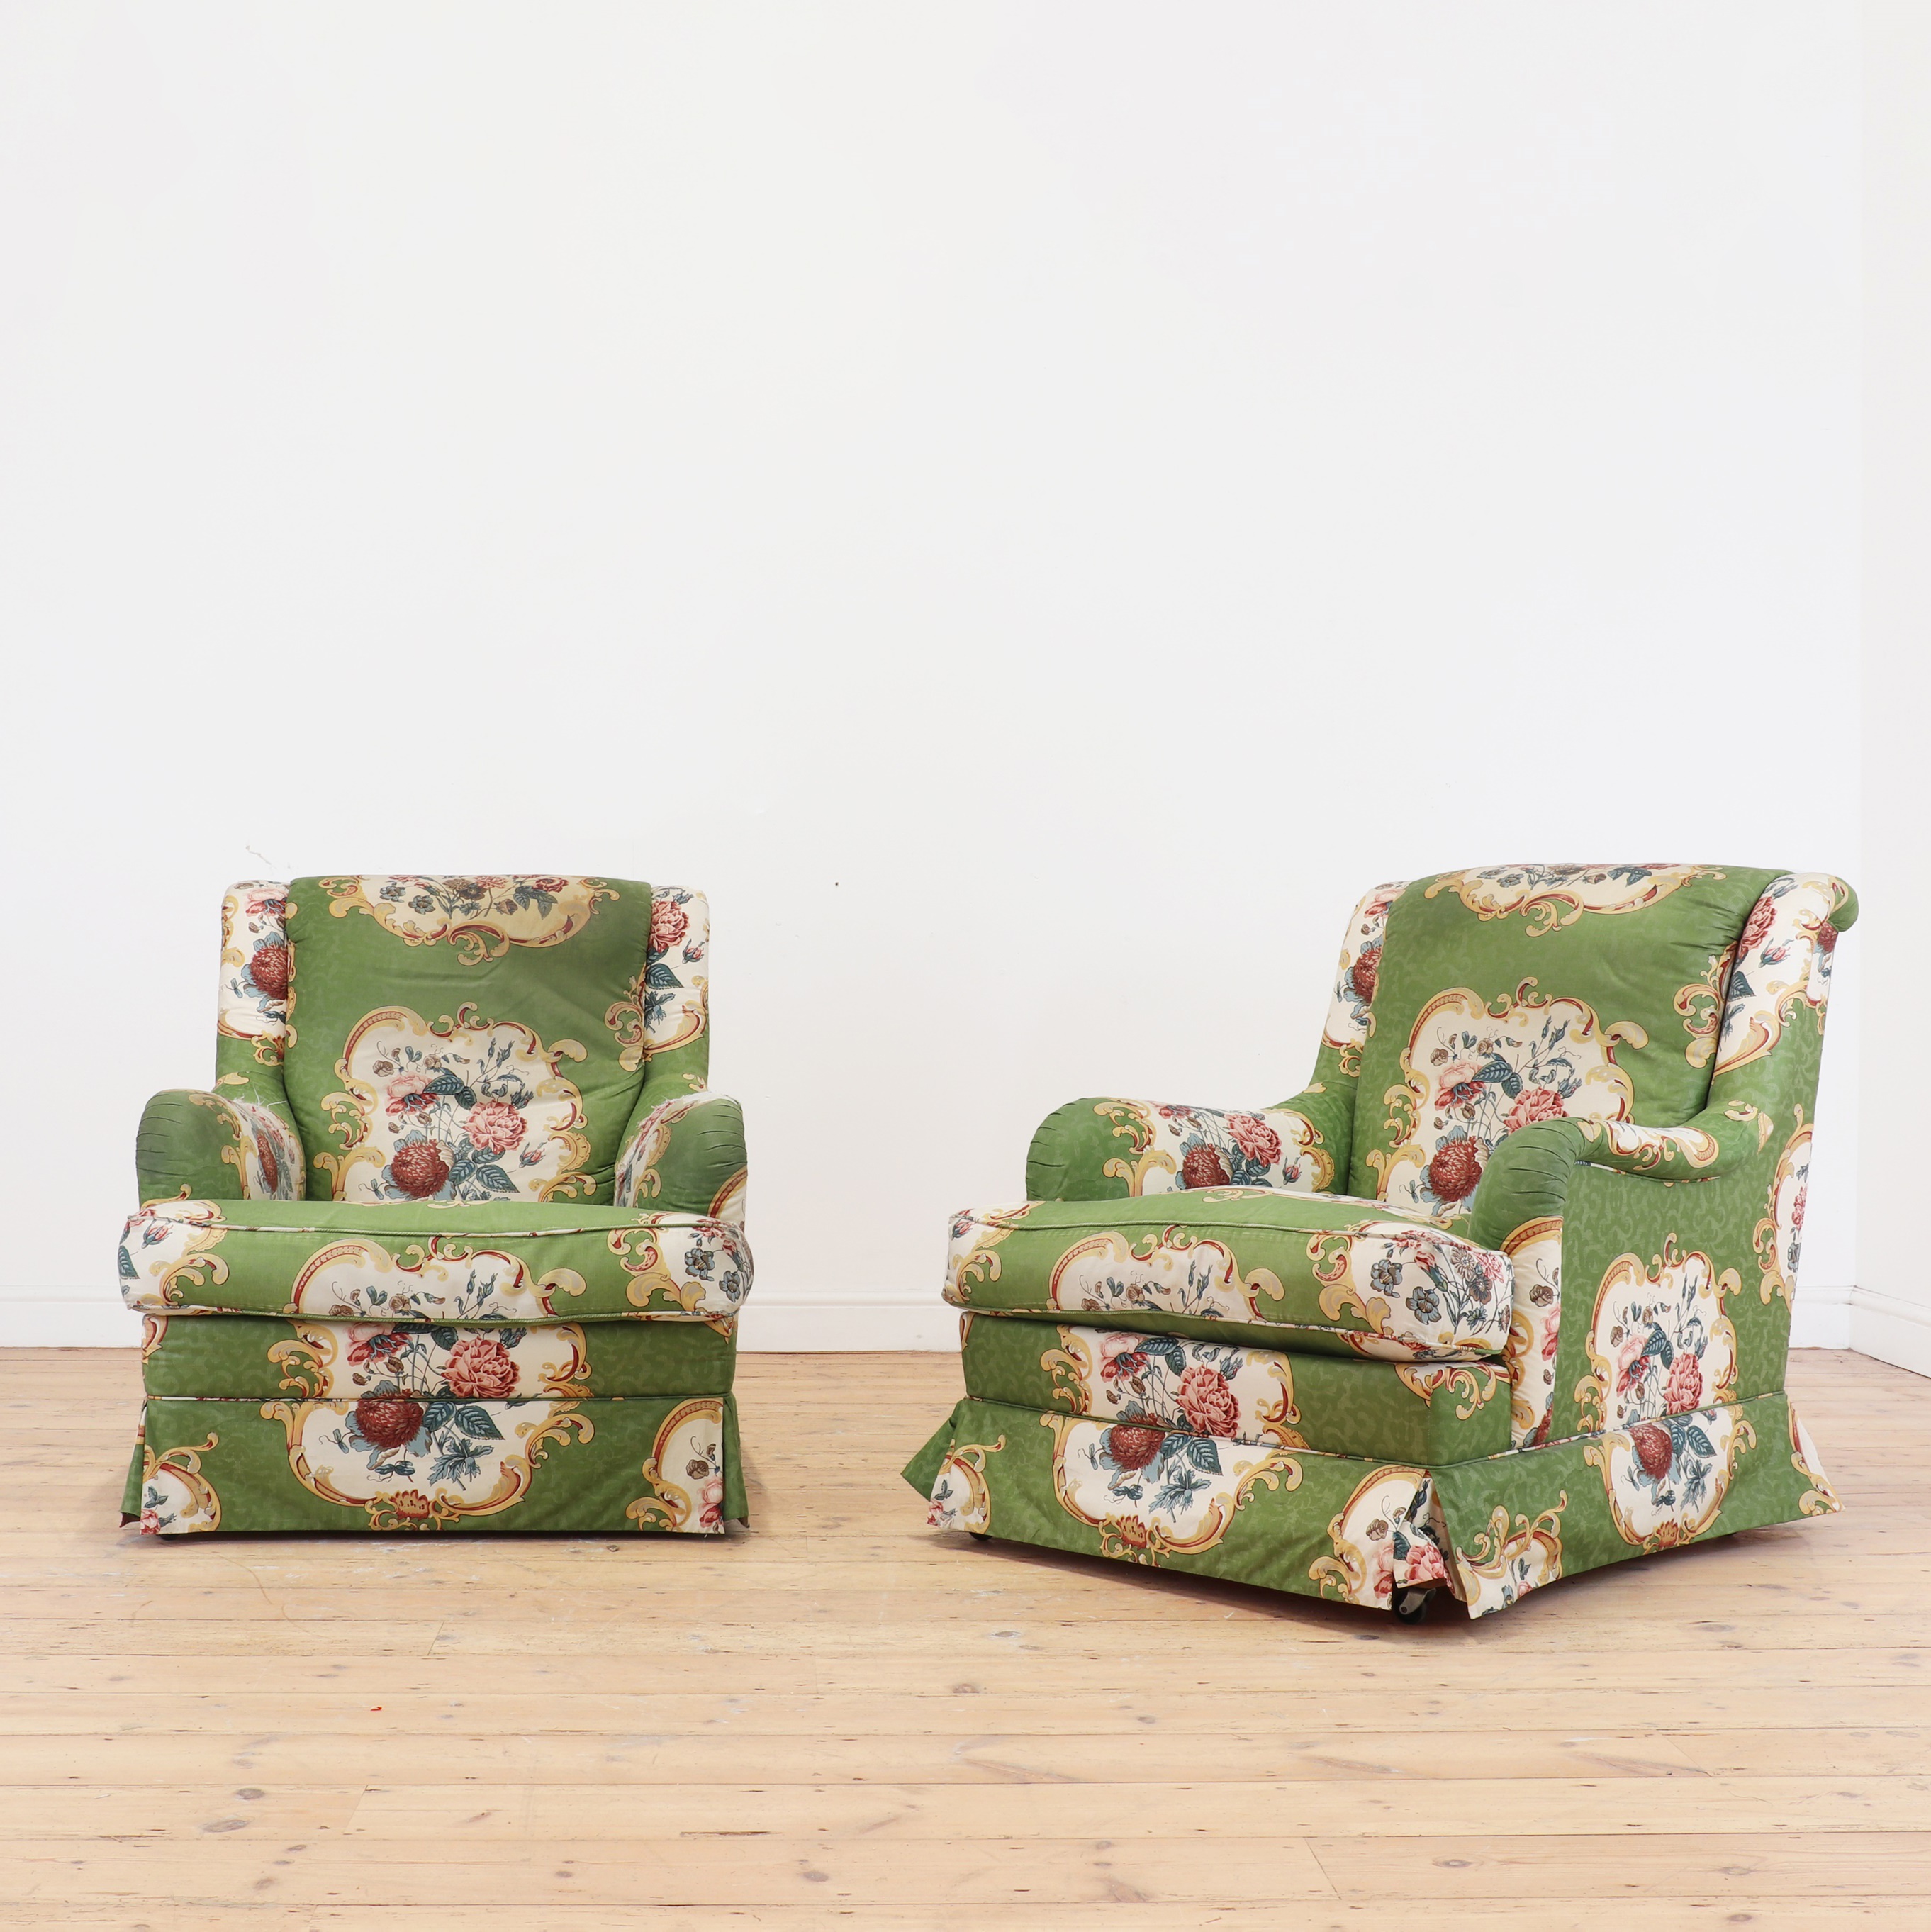 A pair of 'St. James' armchairs by Kingcome